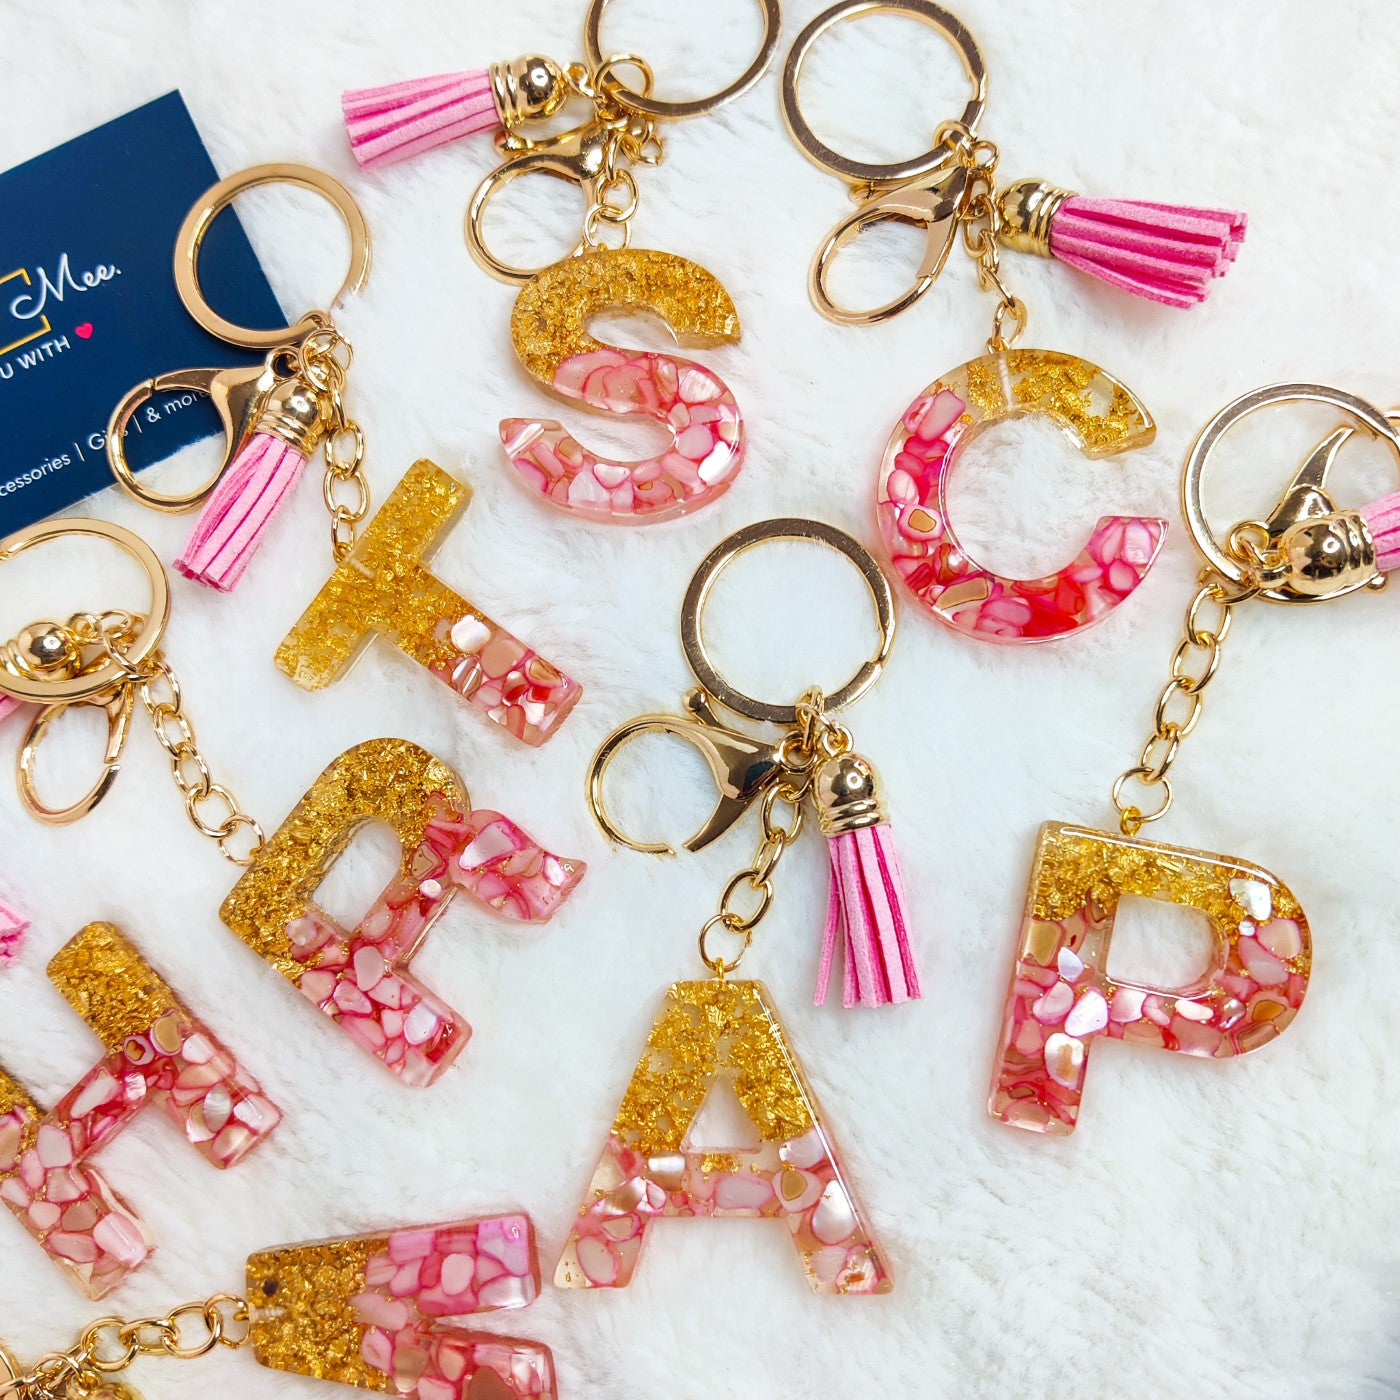 Premium Resin Art Initial Letter Keychains with Hook and Tassel (Pink)